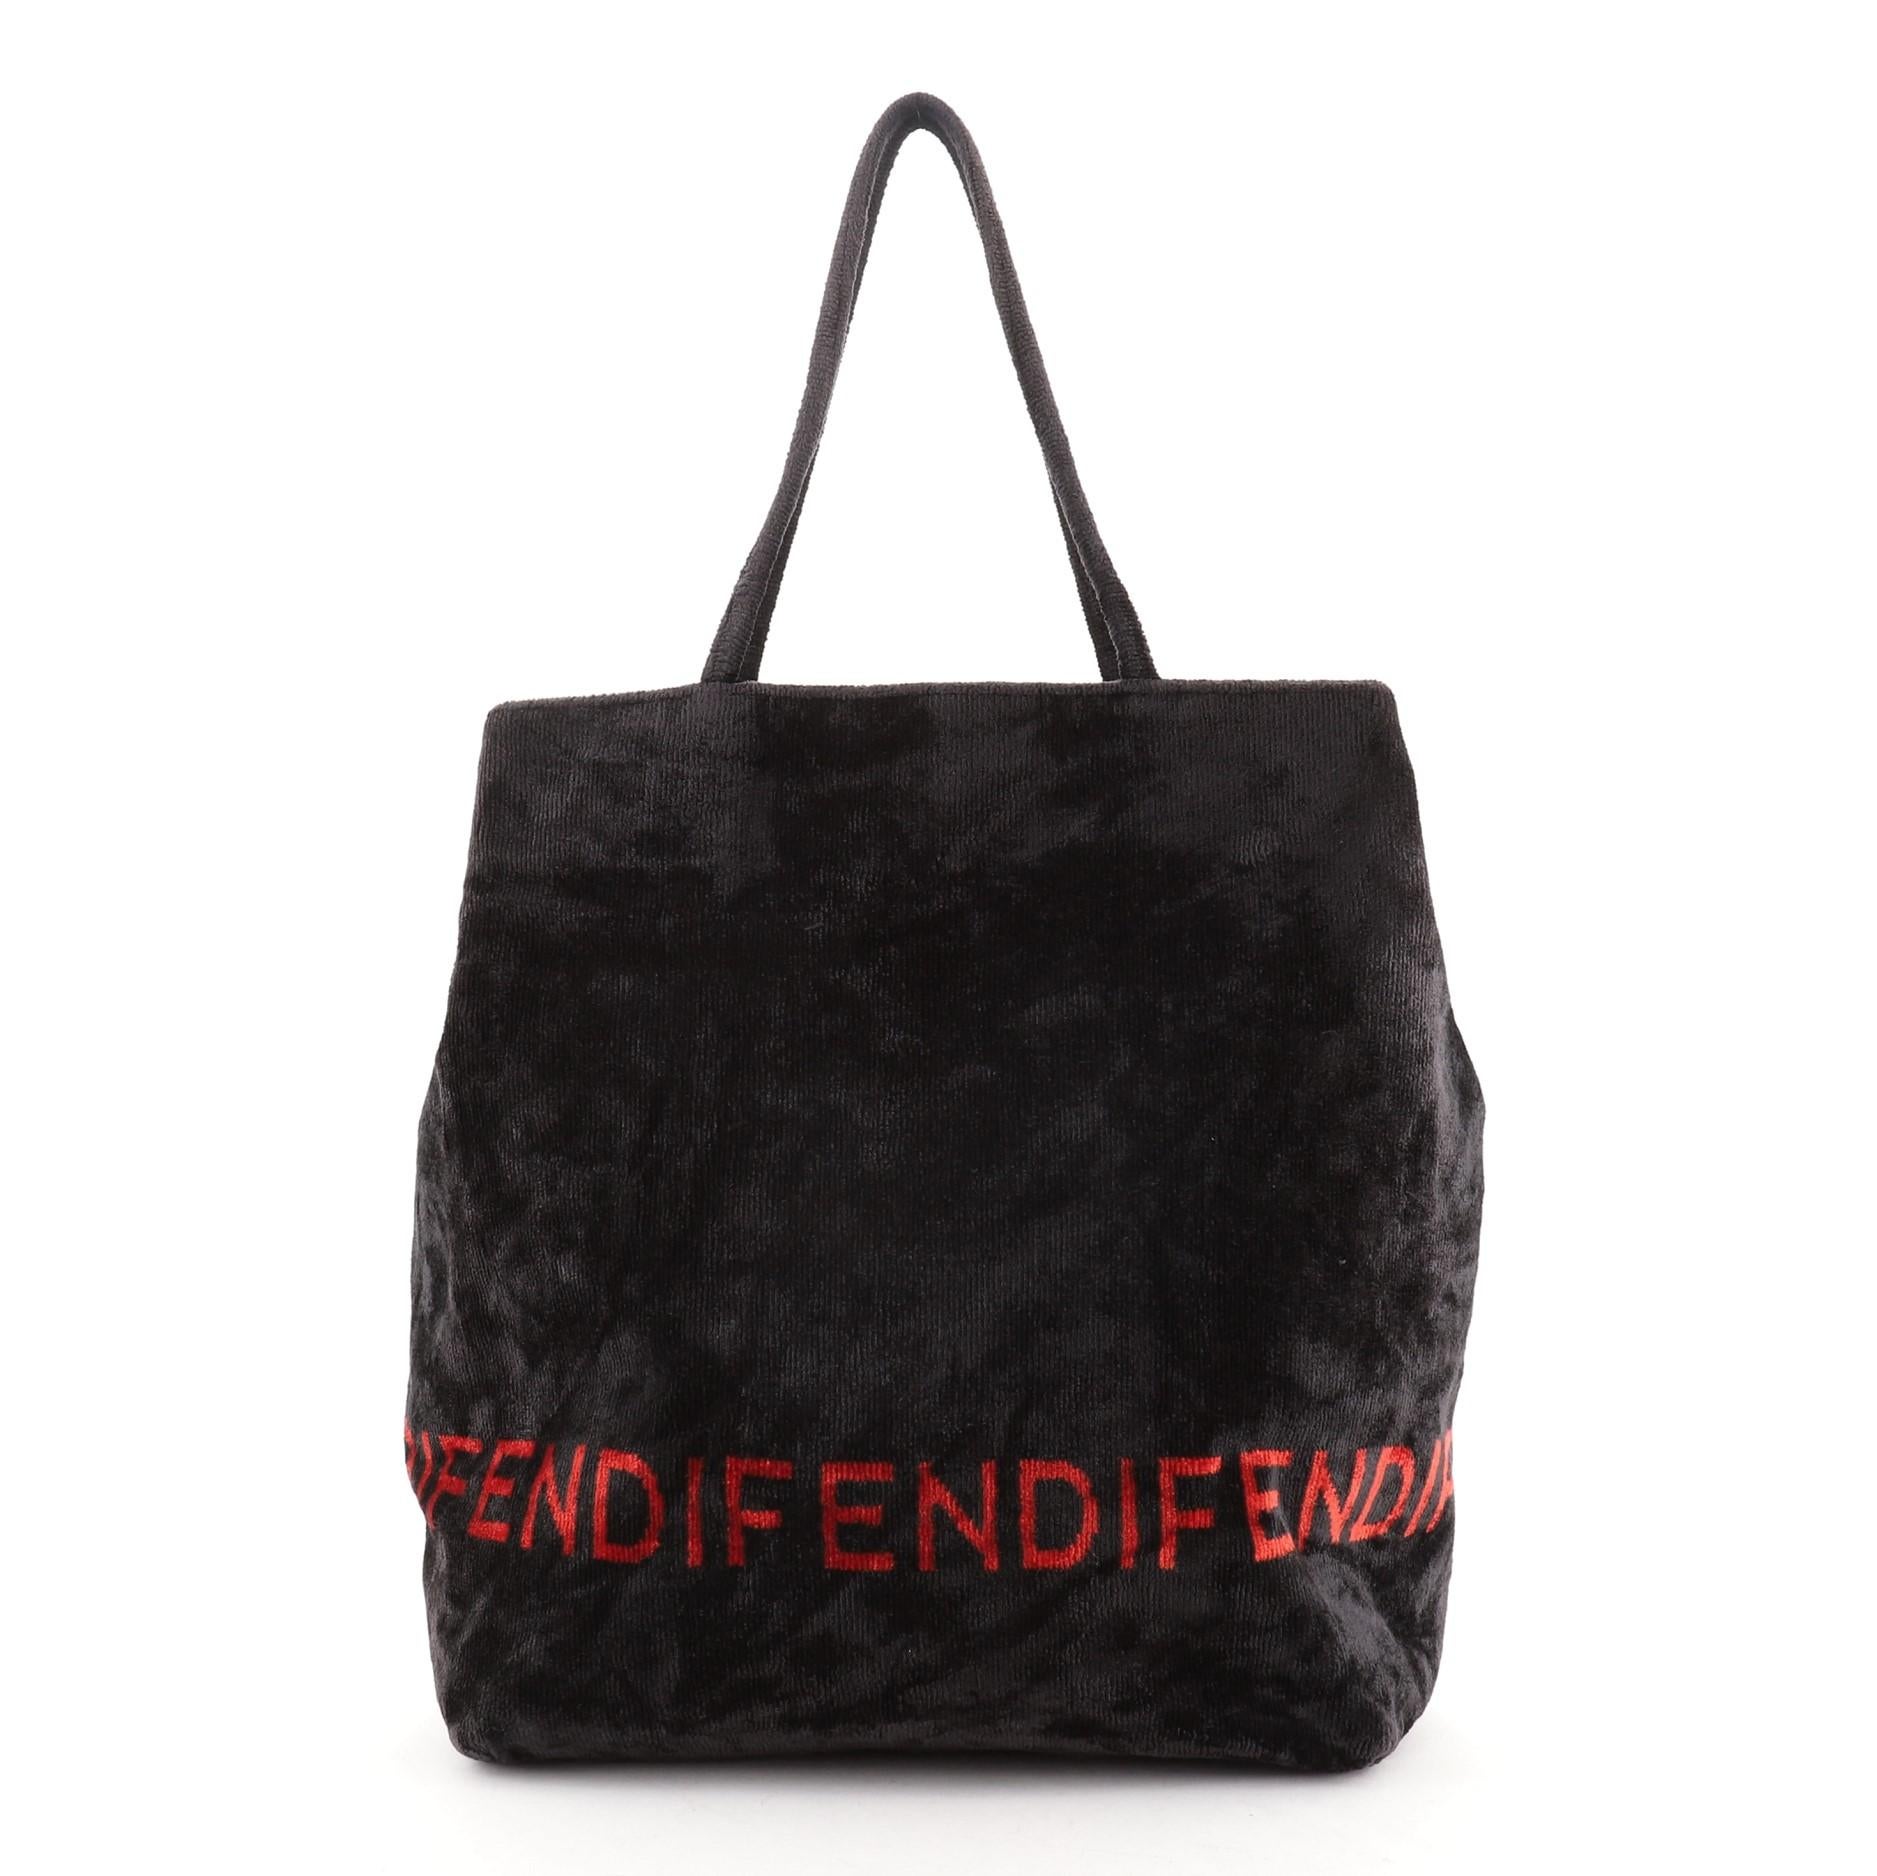 Fendi Vintage Logo Tote Velvet Large
Black

Condition Details: Odor in interior. Creasing and wear on exterior, small marks in interior, scratches and tarnish on hardware.

51910MSC

Height 14